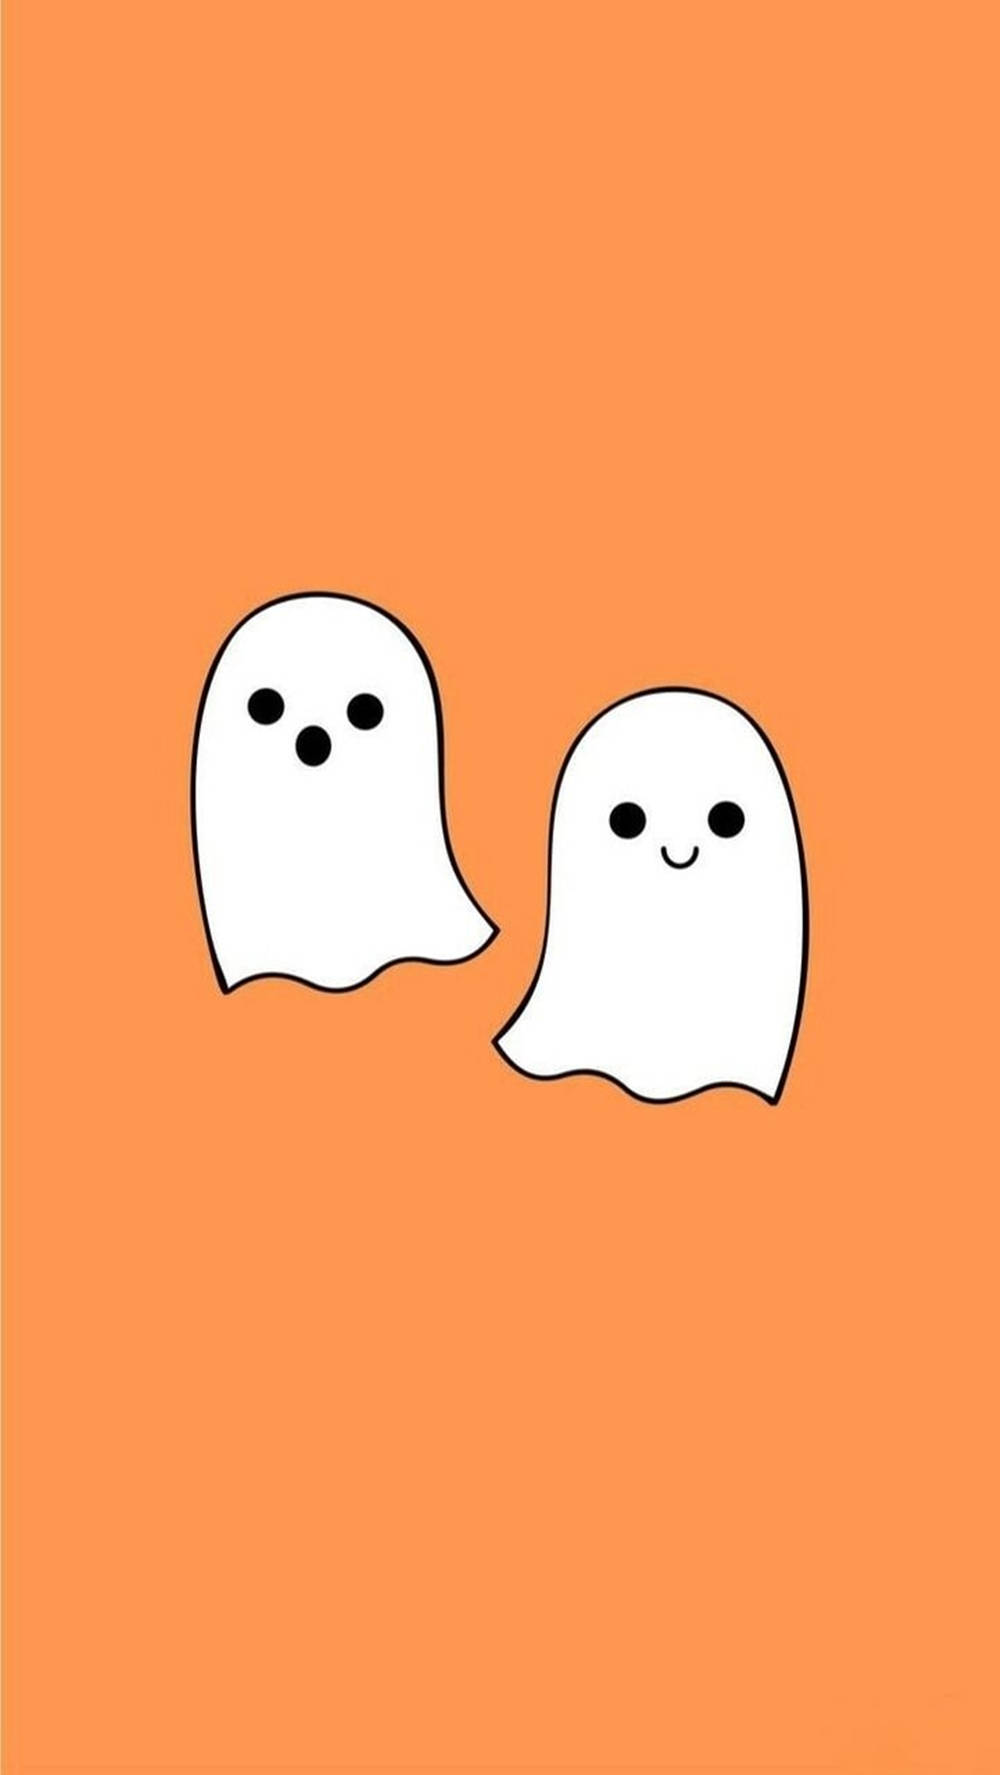 Two Friendly Ghosts Aesthetic Orange